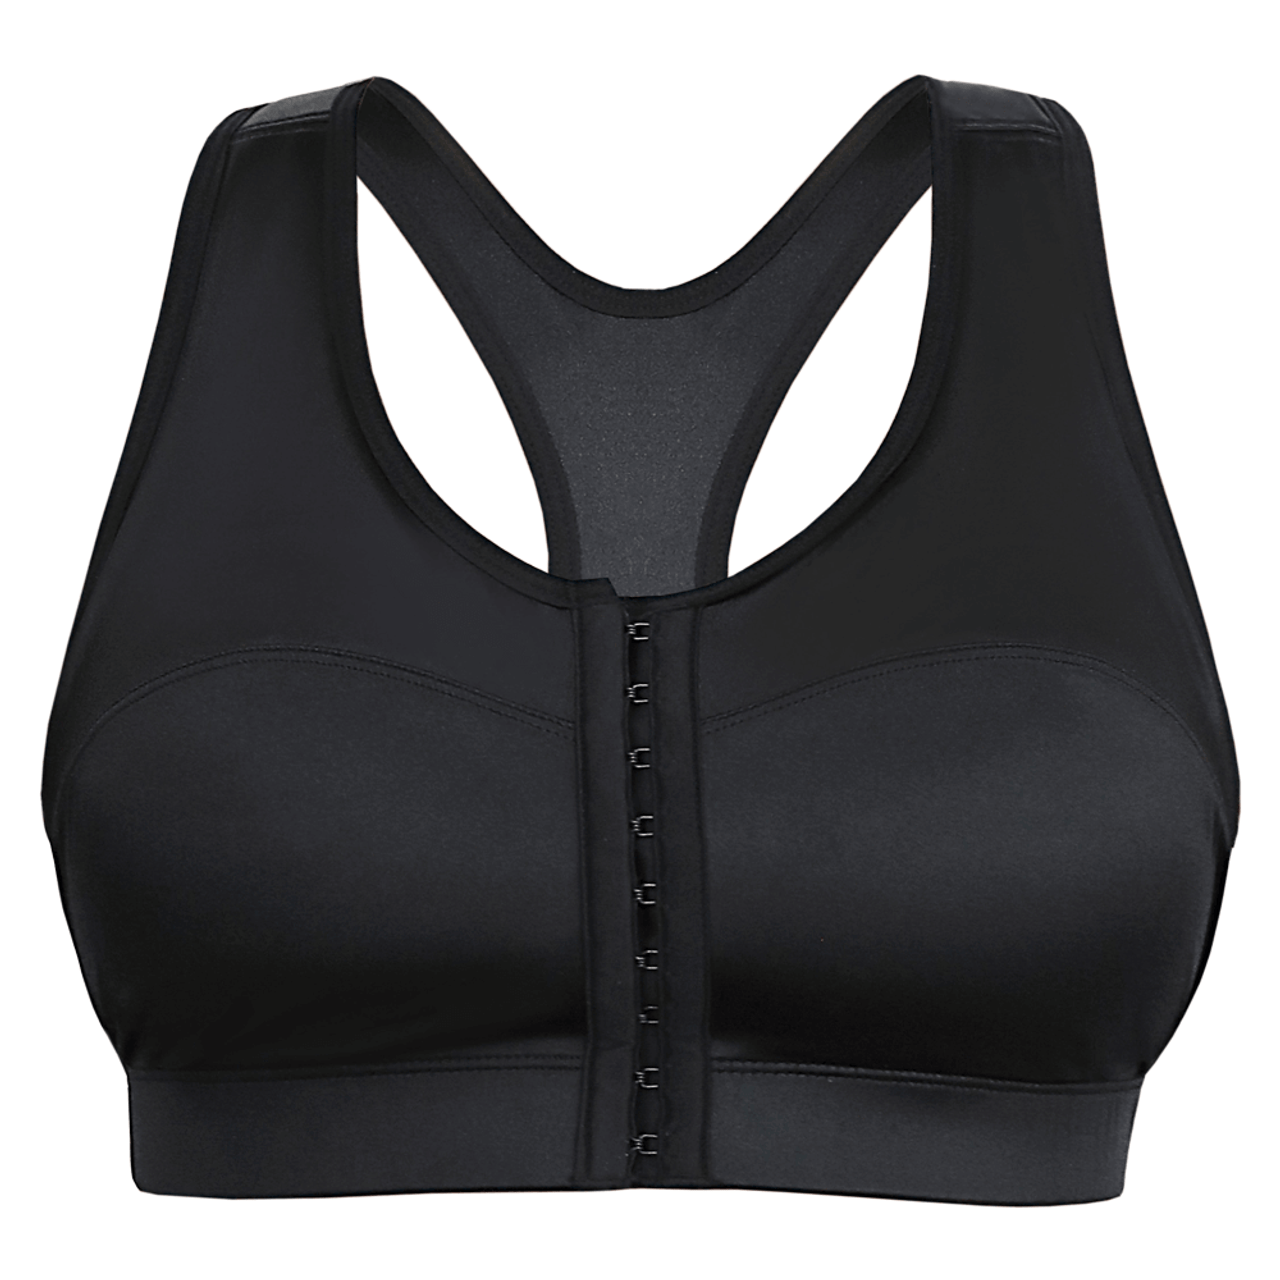 ENELL Enell Pride Racer Sports Bra